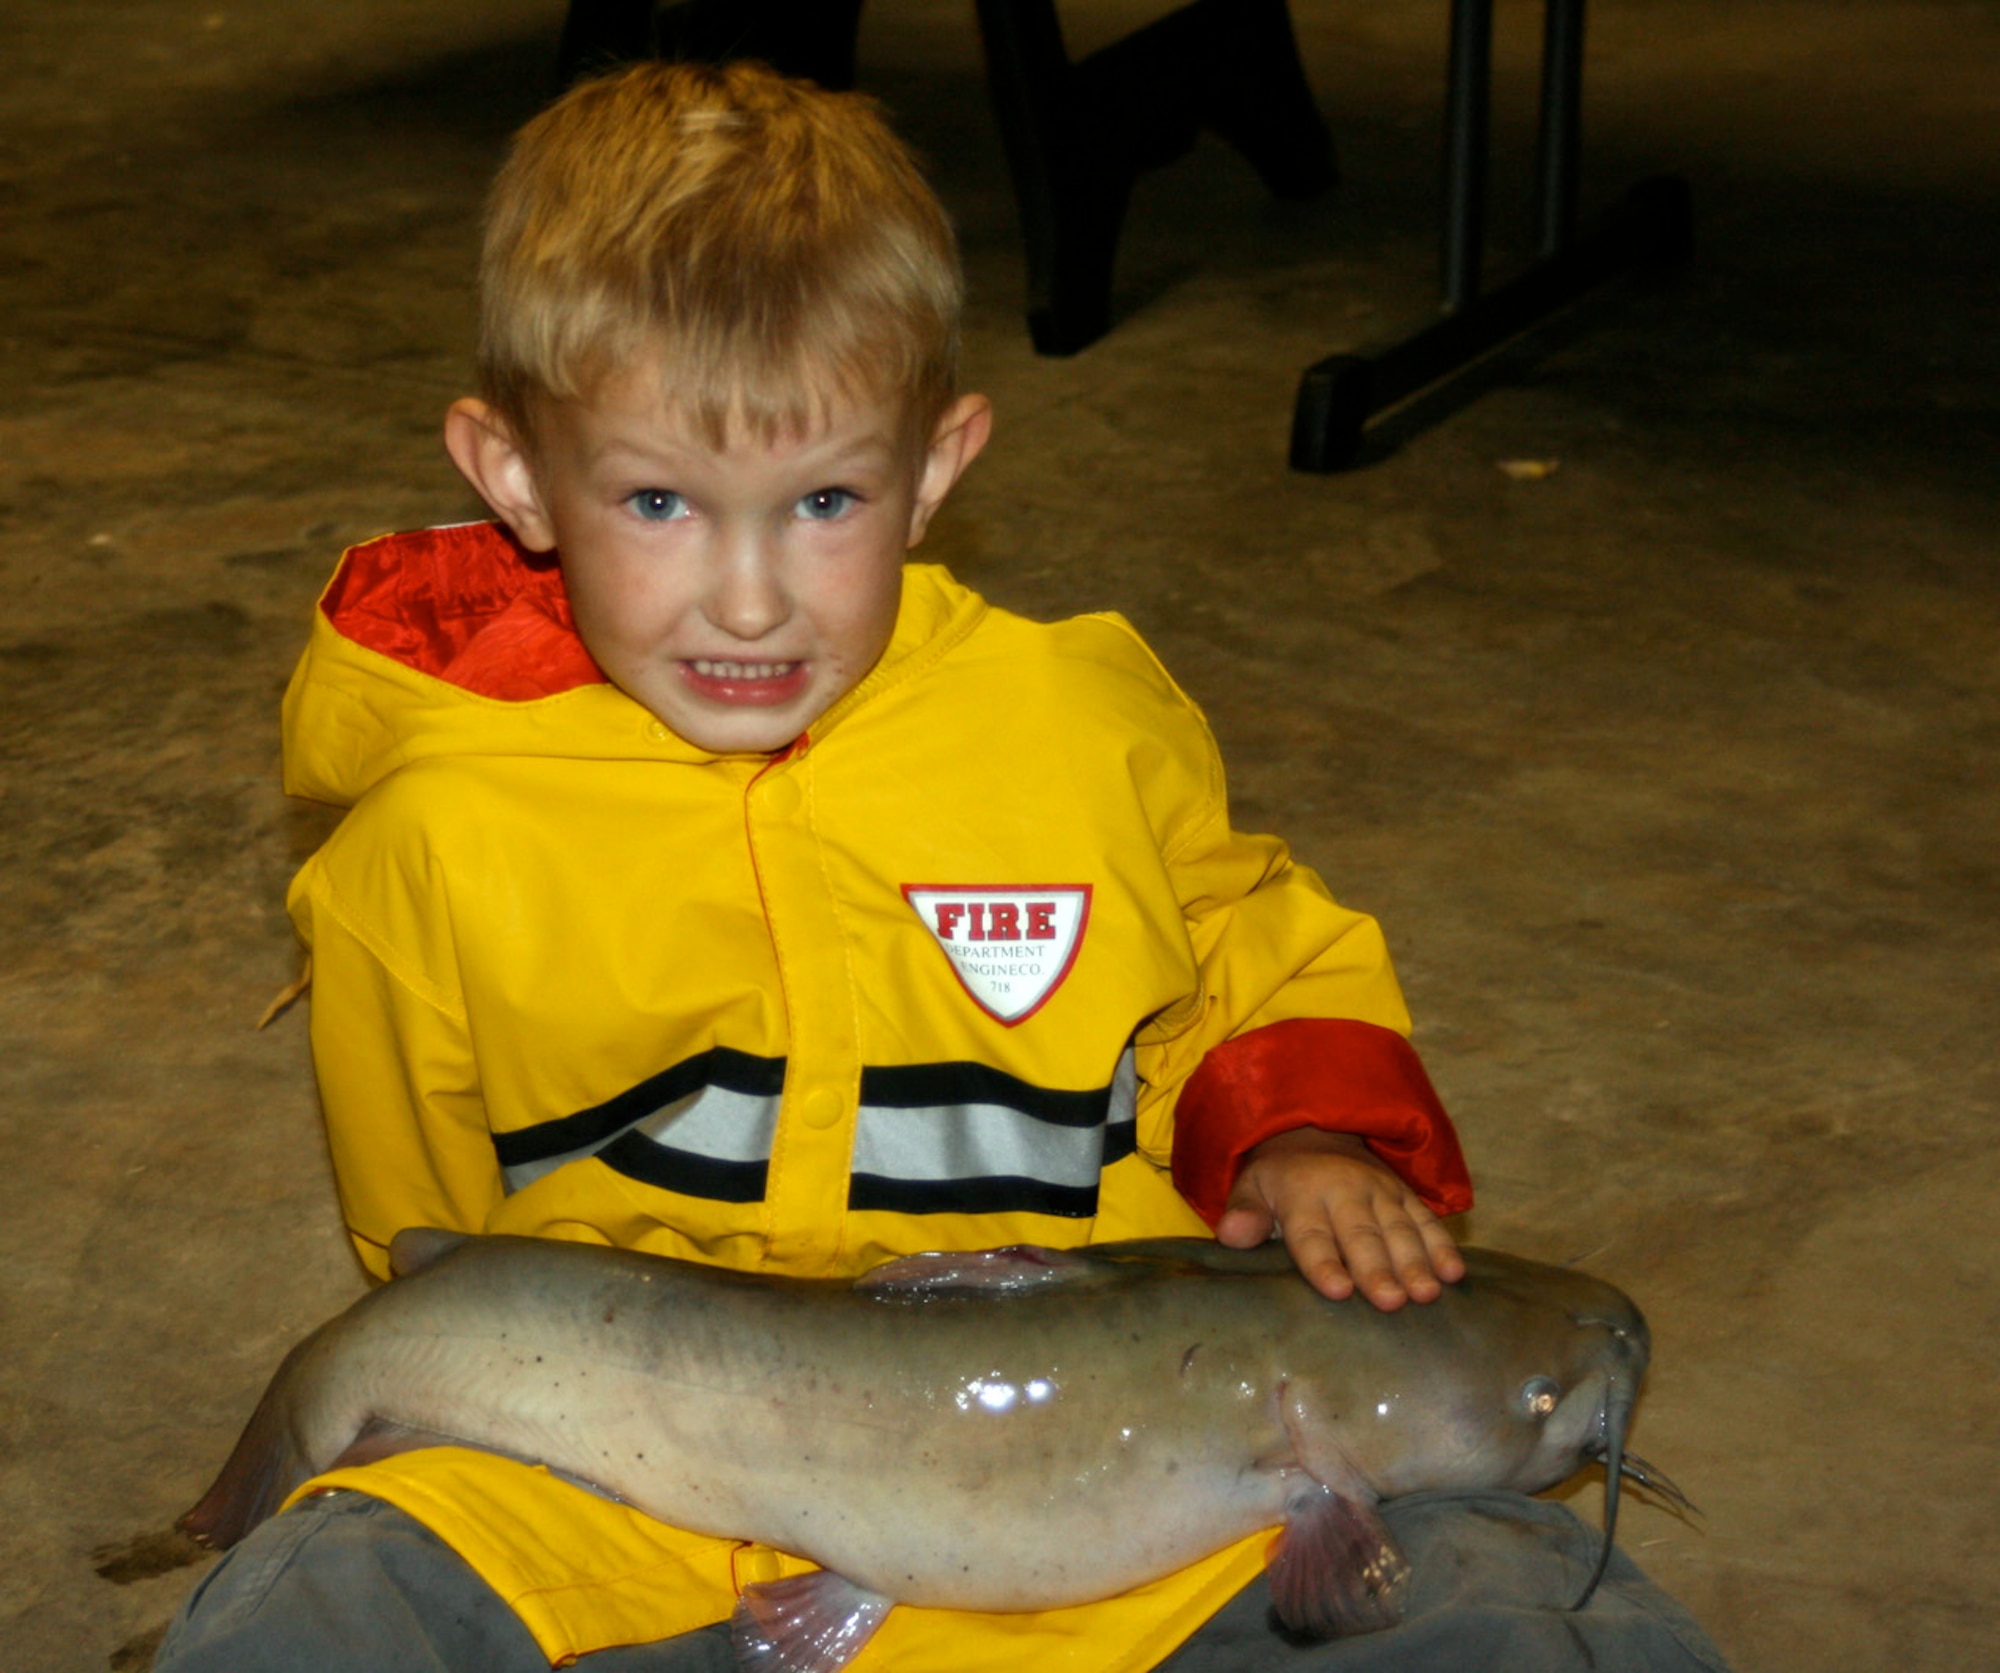 In June 2007, 4-year-old Ty Nordstrom caught a 7-pound catfish in Lake Kirby, Abilene, Texas. In October 2007, Ty faced an even bigger battle when he was diagnosed with non-rhabdomyosarcoma cancer. He died in November 2009, one month before his seventh birthday. Ty’s dad, Master Sgt. Lyle Nordstrom, the 352nd Special Operations Group Inspector General superintendent, shares the story of his loss to raise awareness of childhood cancer. (Courtesy photo)